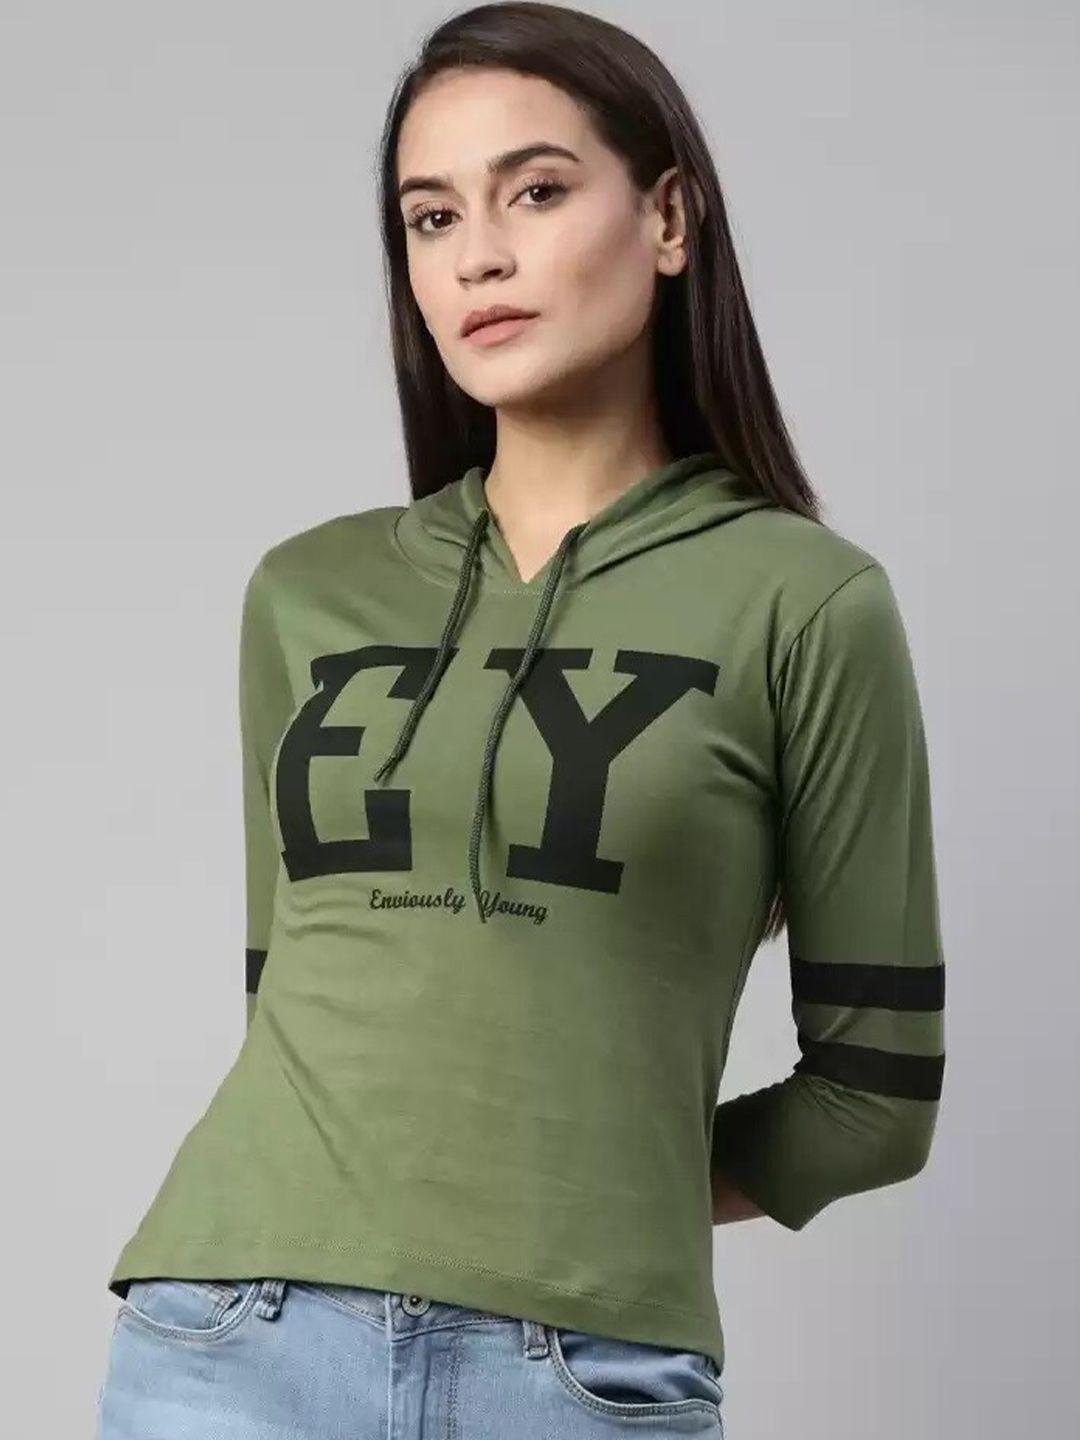 enviously young women olive green biker extended sleeves applique t-shirt